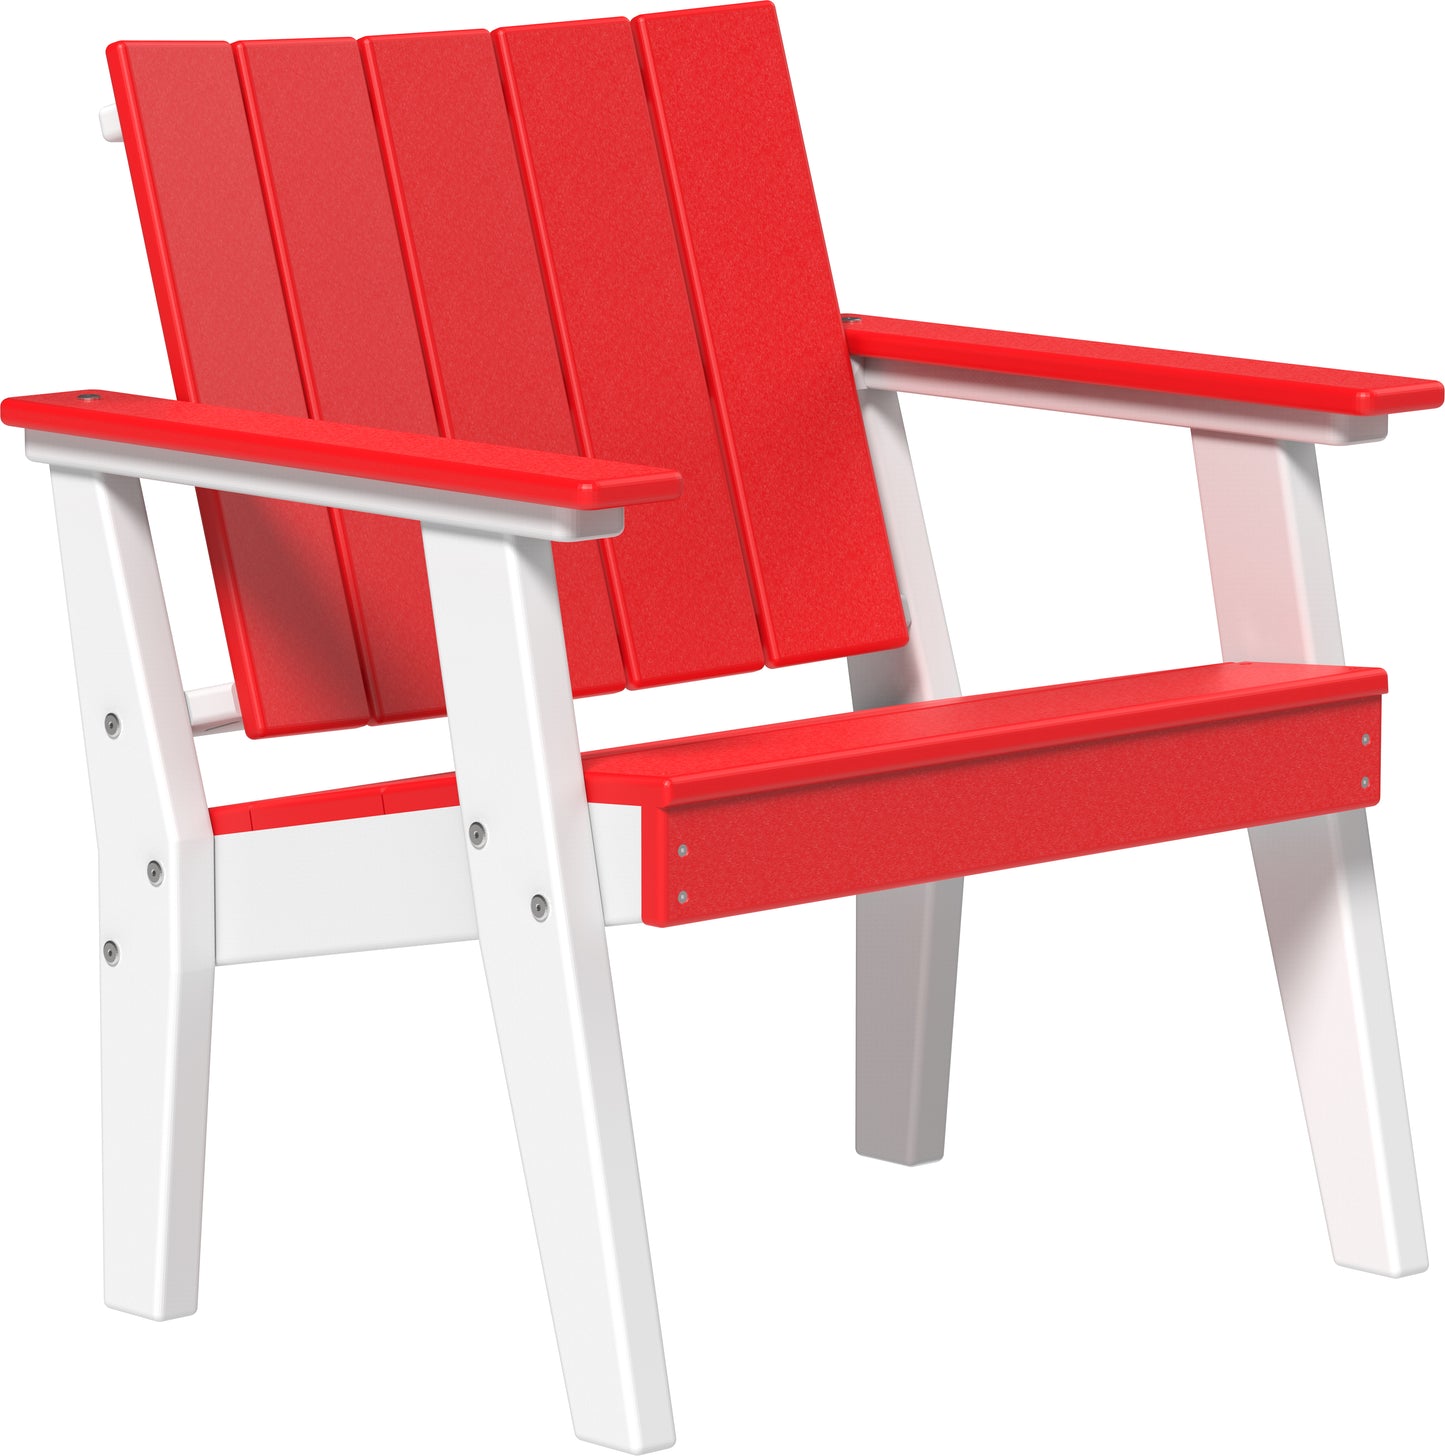 LuxCraft Recycled Plastic Urban Chat Deck Chair - LEAD TIME TO SHIP 10 TO 12 BUSINESS DAYS